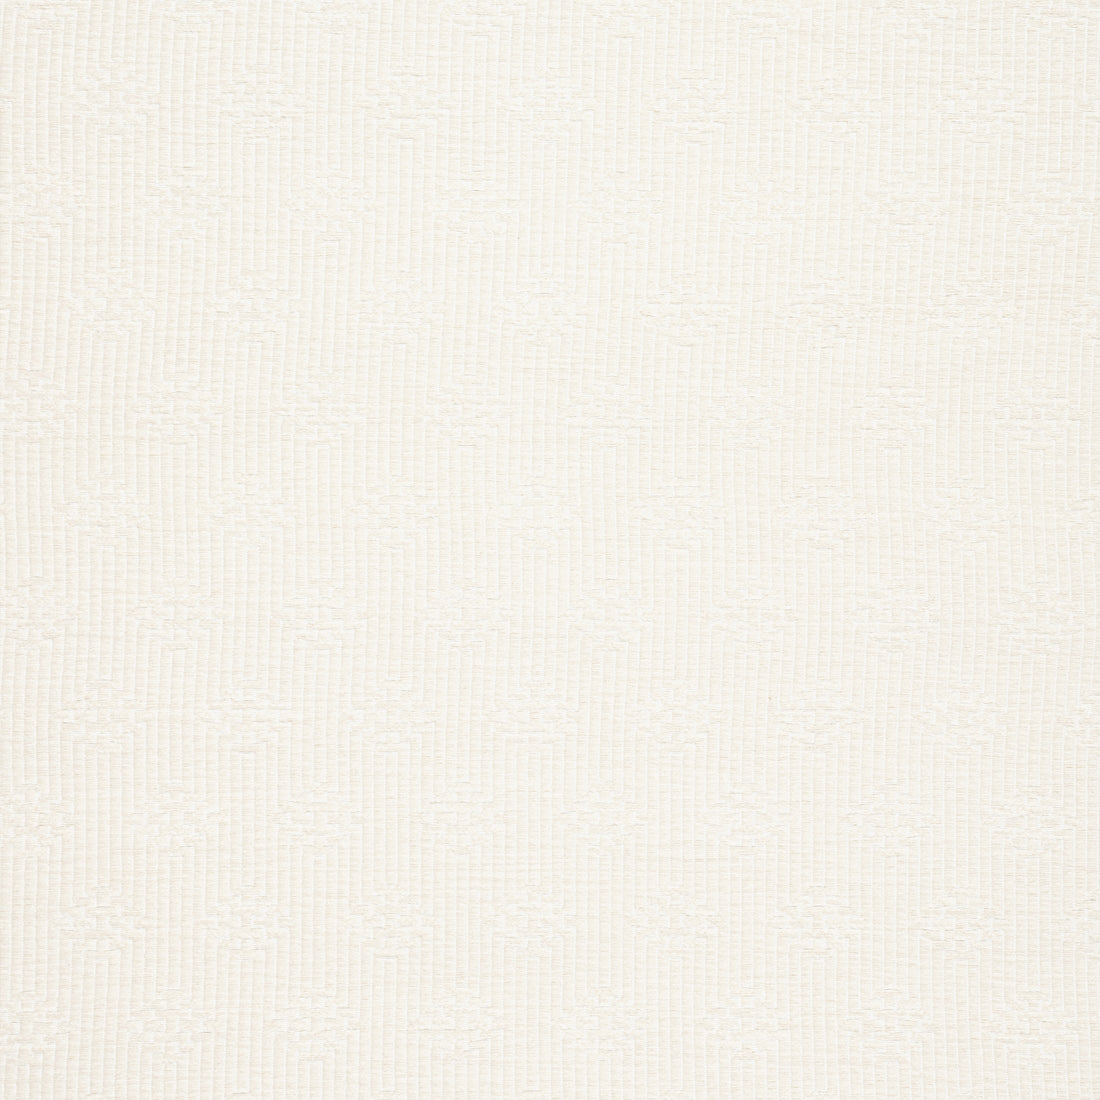 Crete fabric in ivory color - pattern number W74206 - by Thibaut in the Passage collection